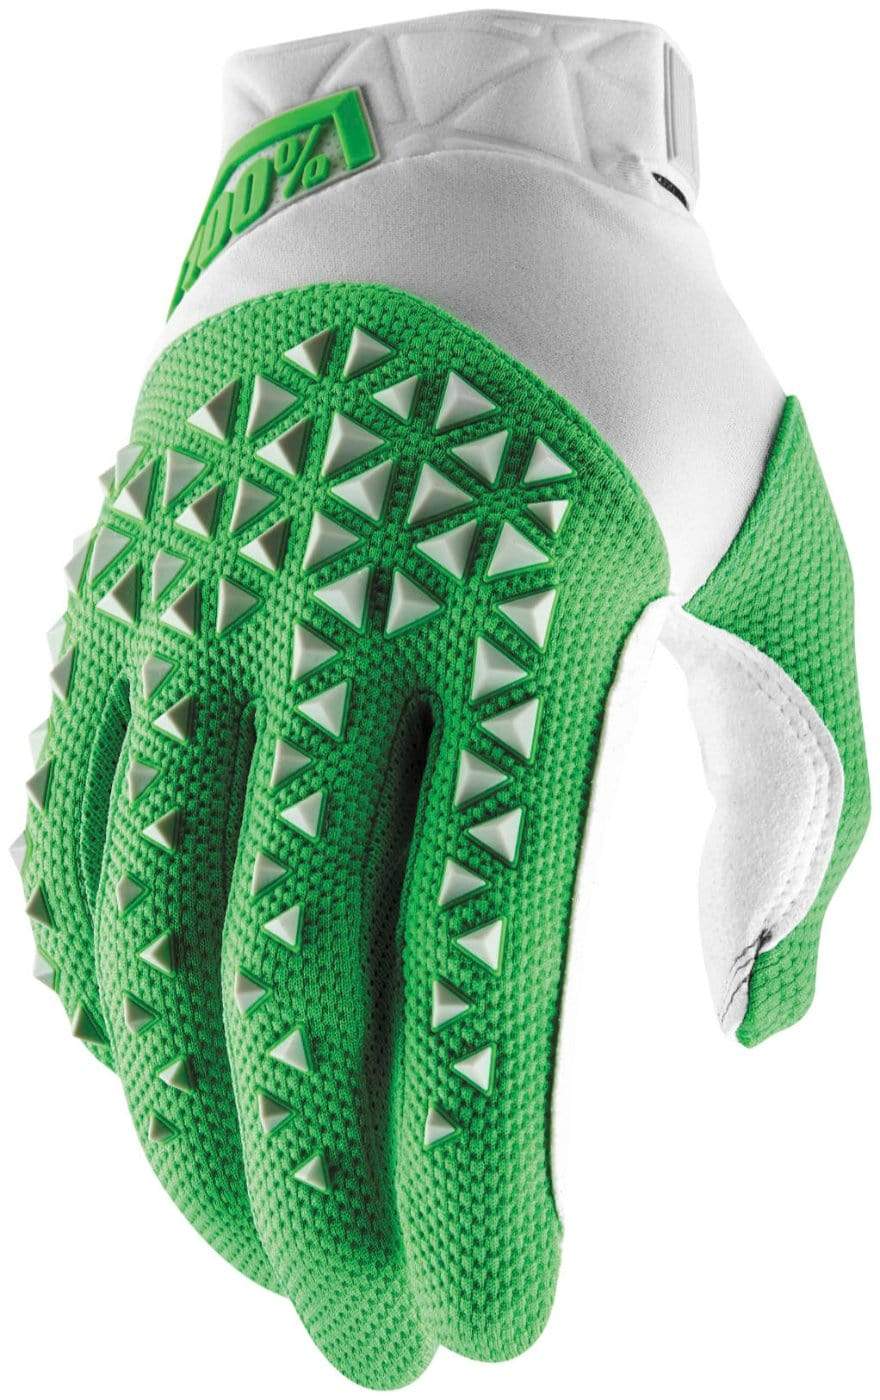 100% Apparel 100% Men's Airmatic Gloves Silver/Fluorescent Lime